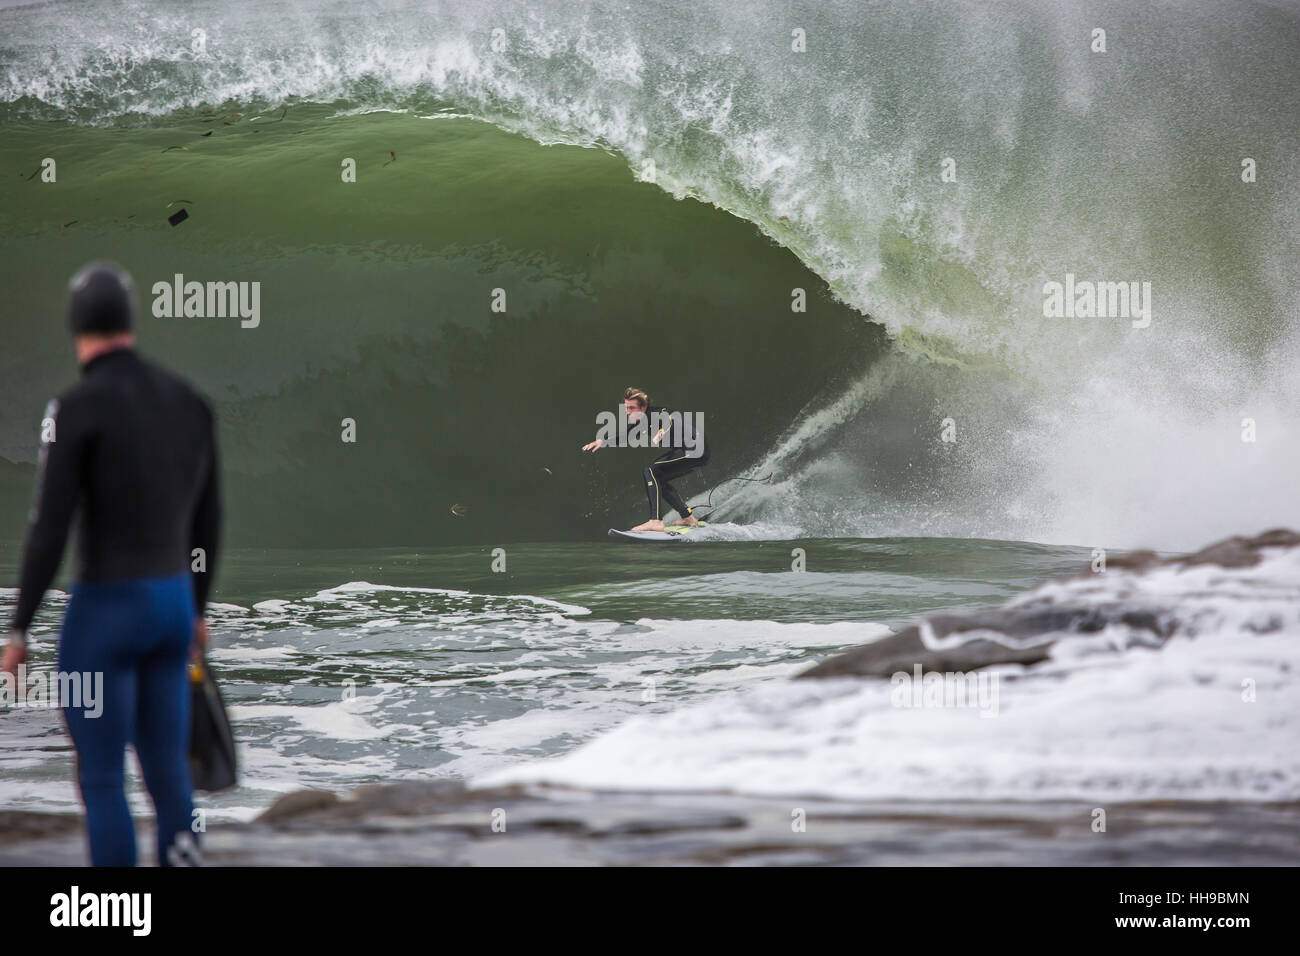 Pro Surfer Riley Laing Surfing In The Red Bull Cape Fear Big Wave Surfing Contest In Sydney Australia Stock Photo Alamy